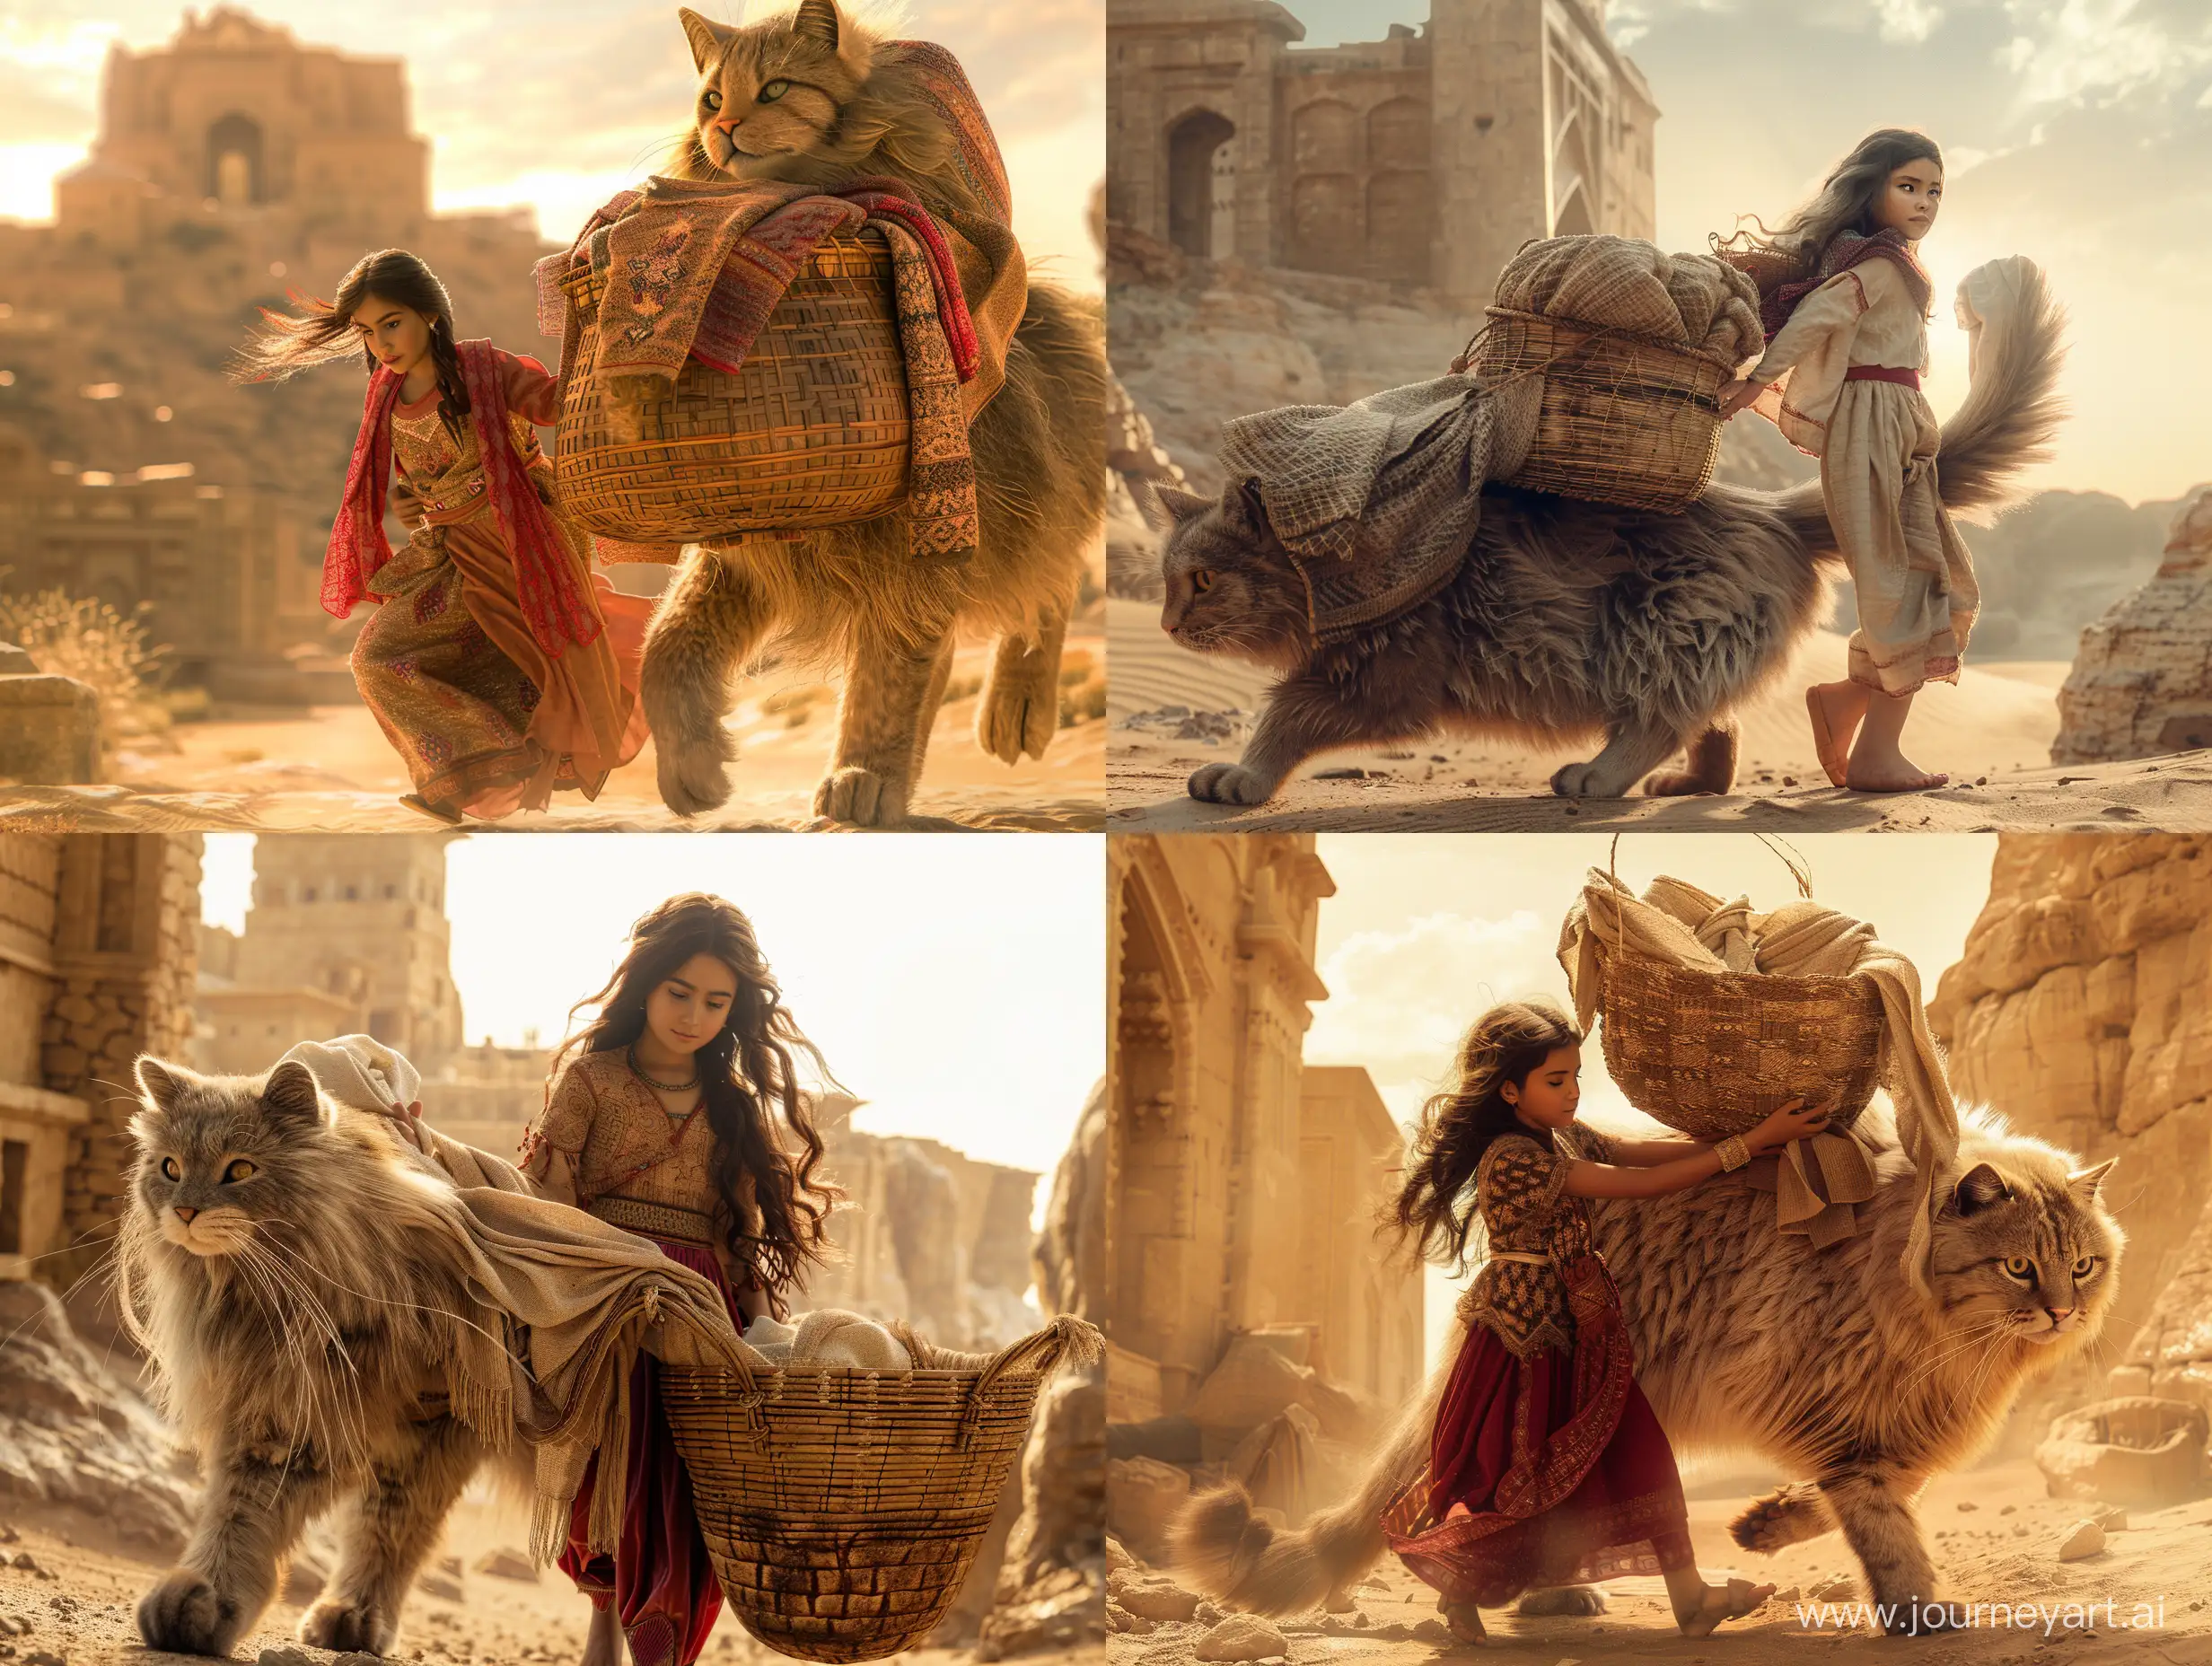 A beautiful Persian girl loads the shawls she has woven into a basket on the back of a giant Persian cat to take inside the citadel. in a desert, in an ancient civilization, cinematic, epic realism,8K, highly detailed, low angle photograph, backlit